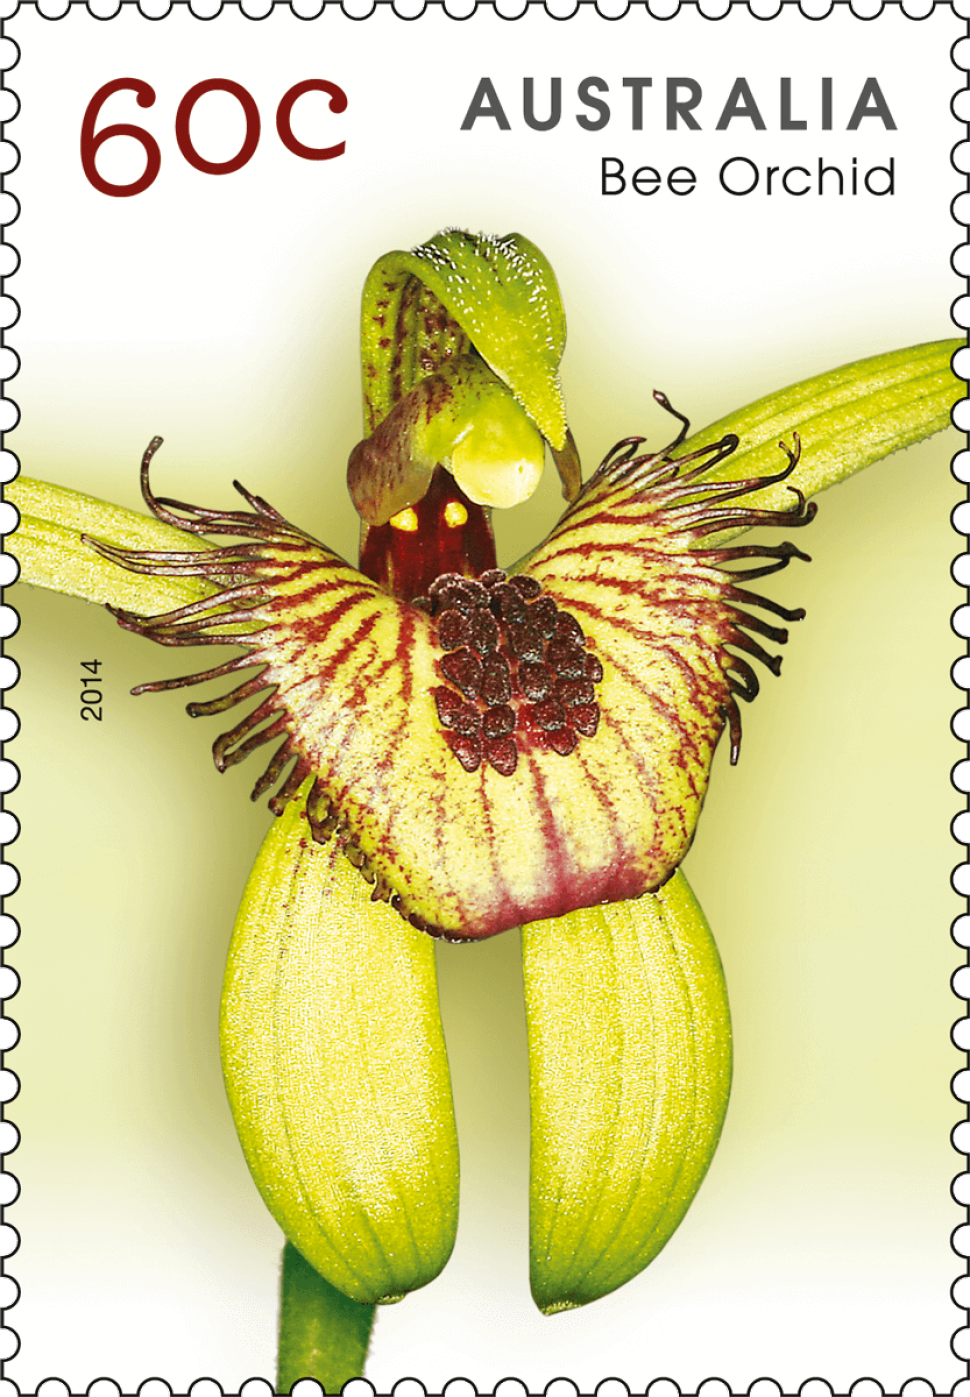 60 cent Bee Orchid stamp